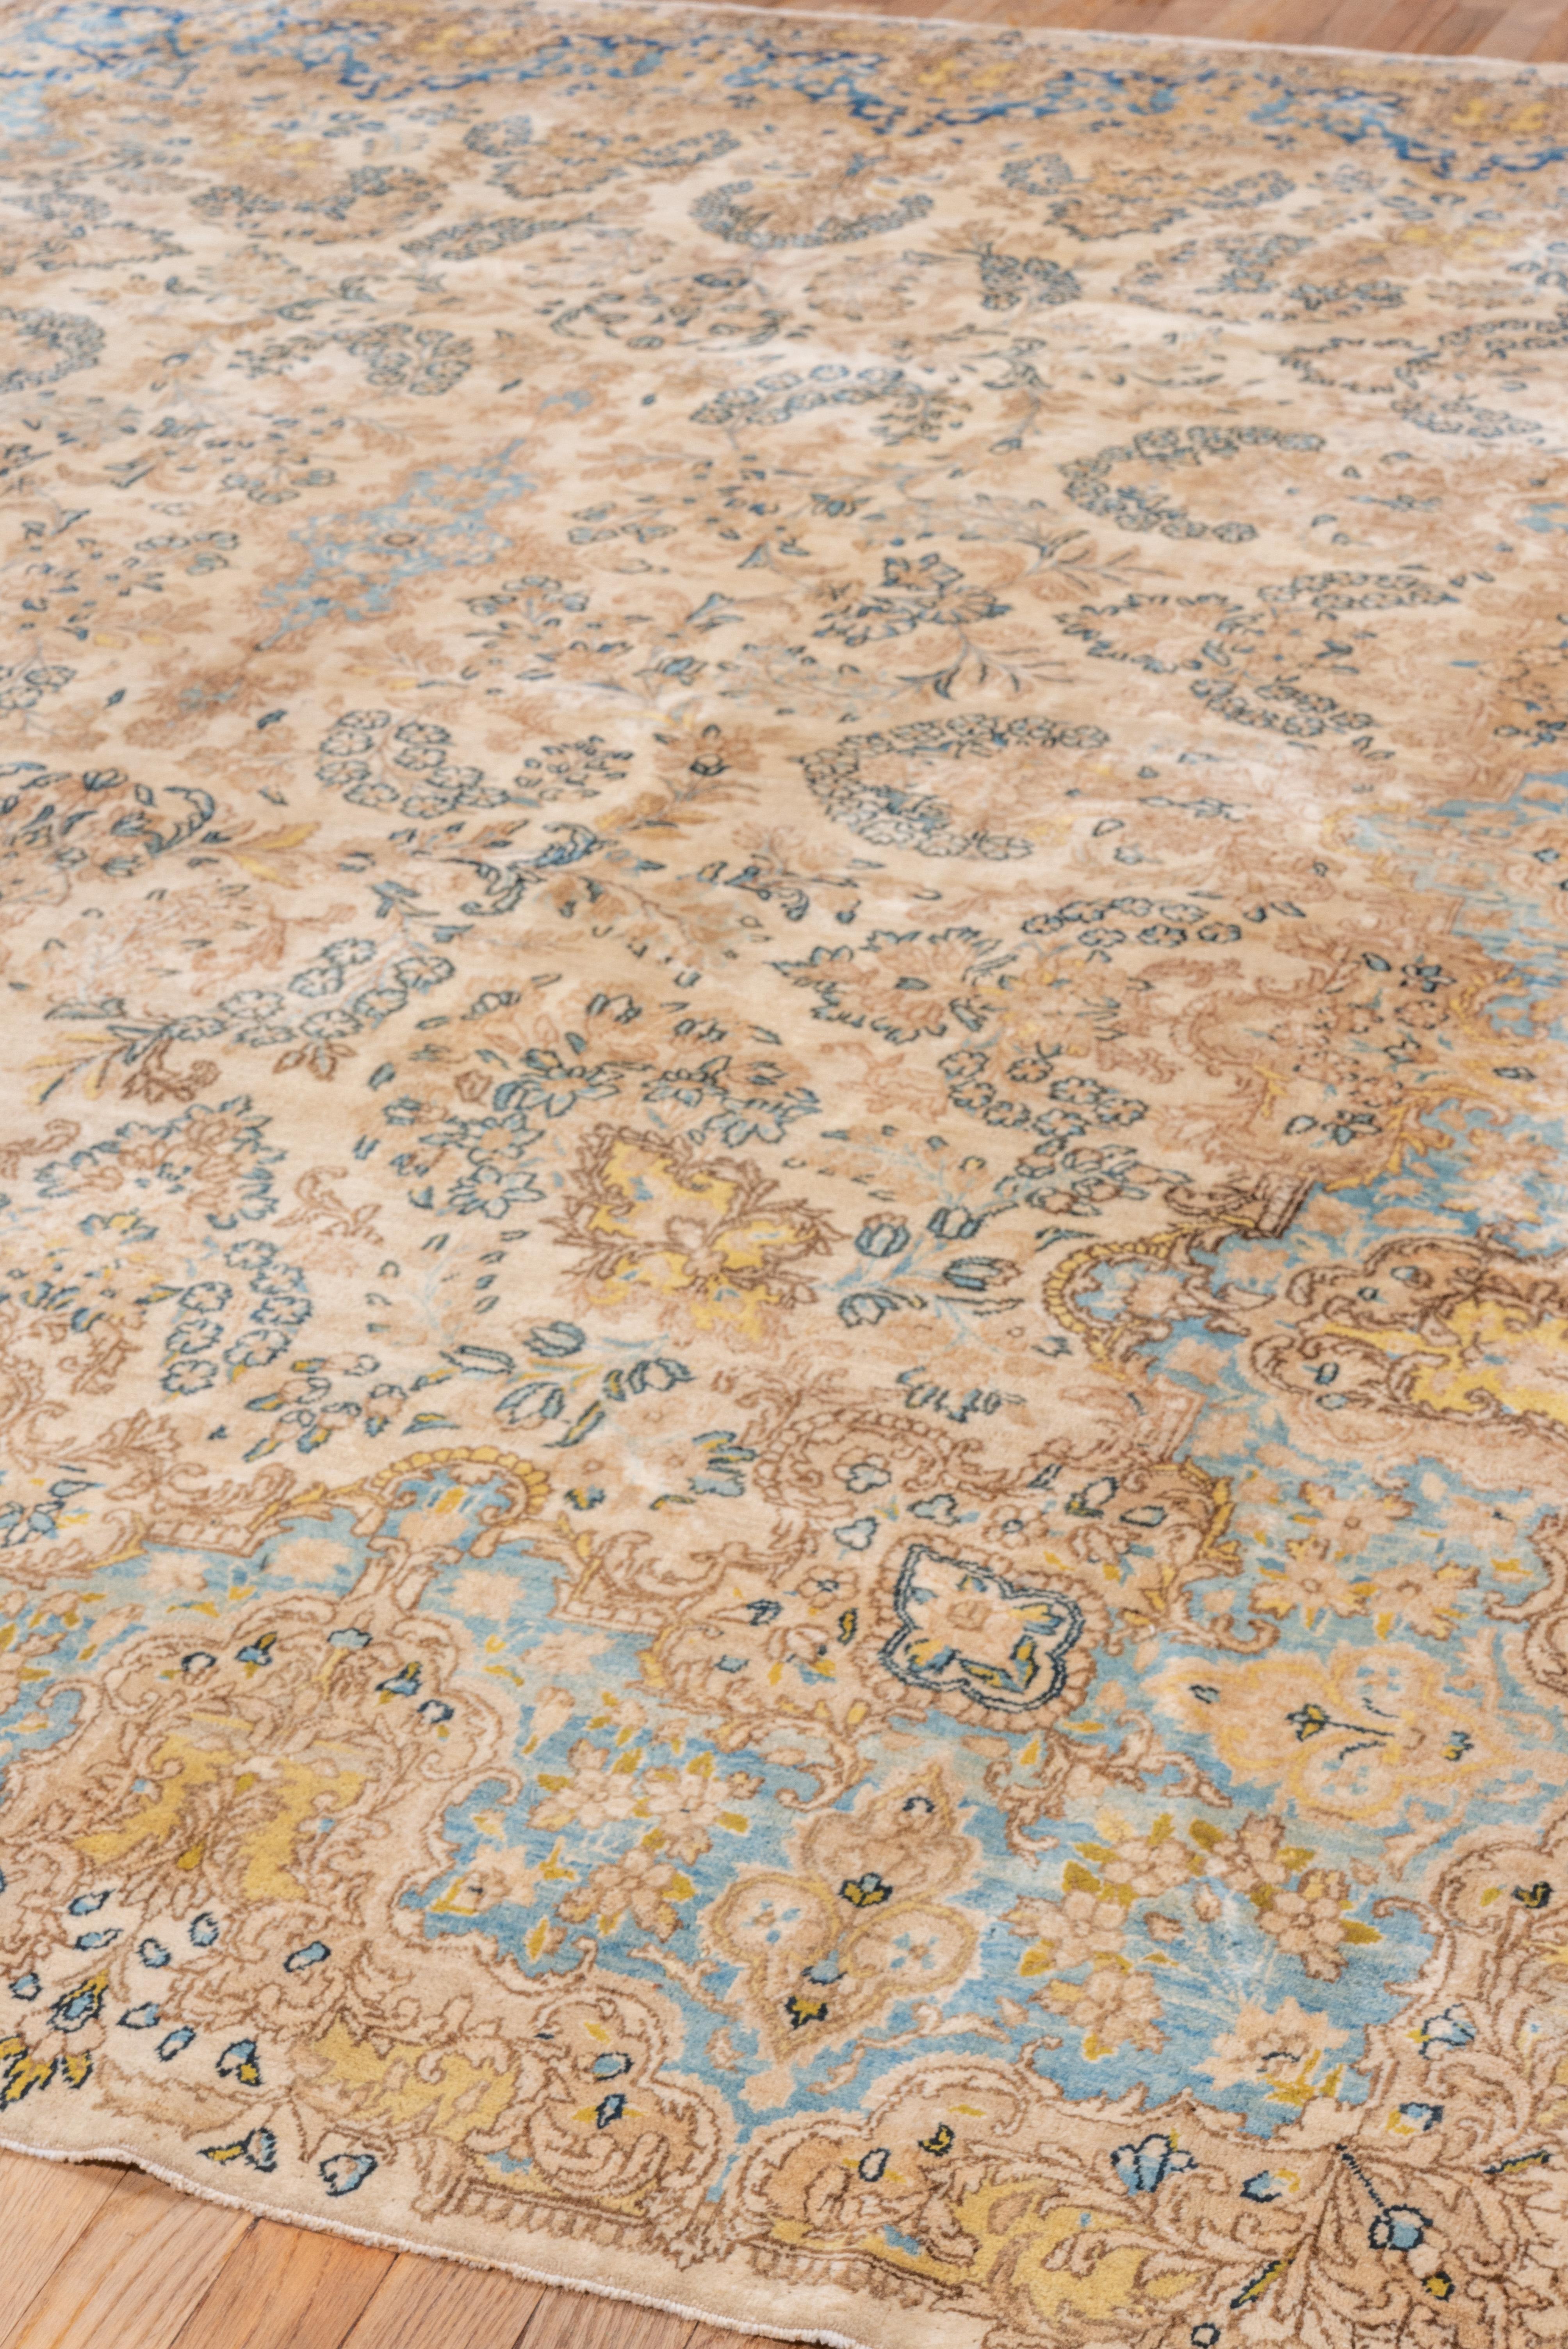 Hand-Knotted Antique Neutral Persian Kerman Carpet with Light Blue & Yellows Tones